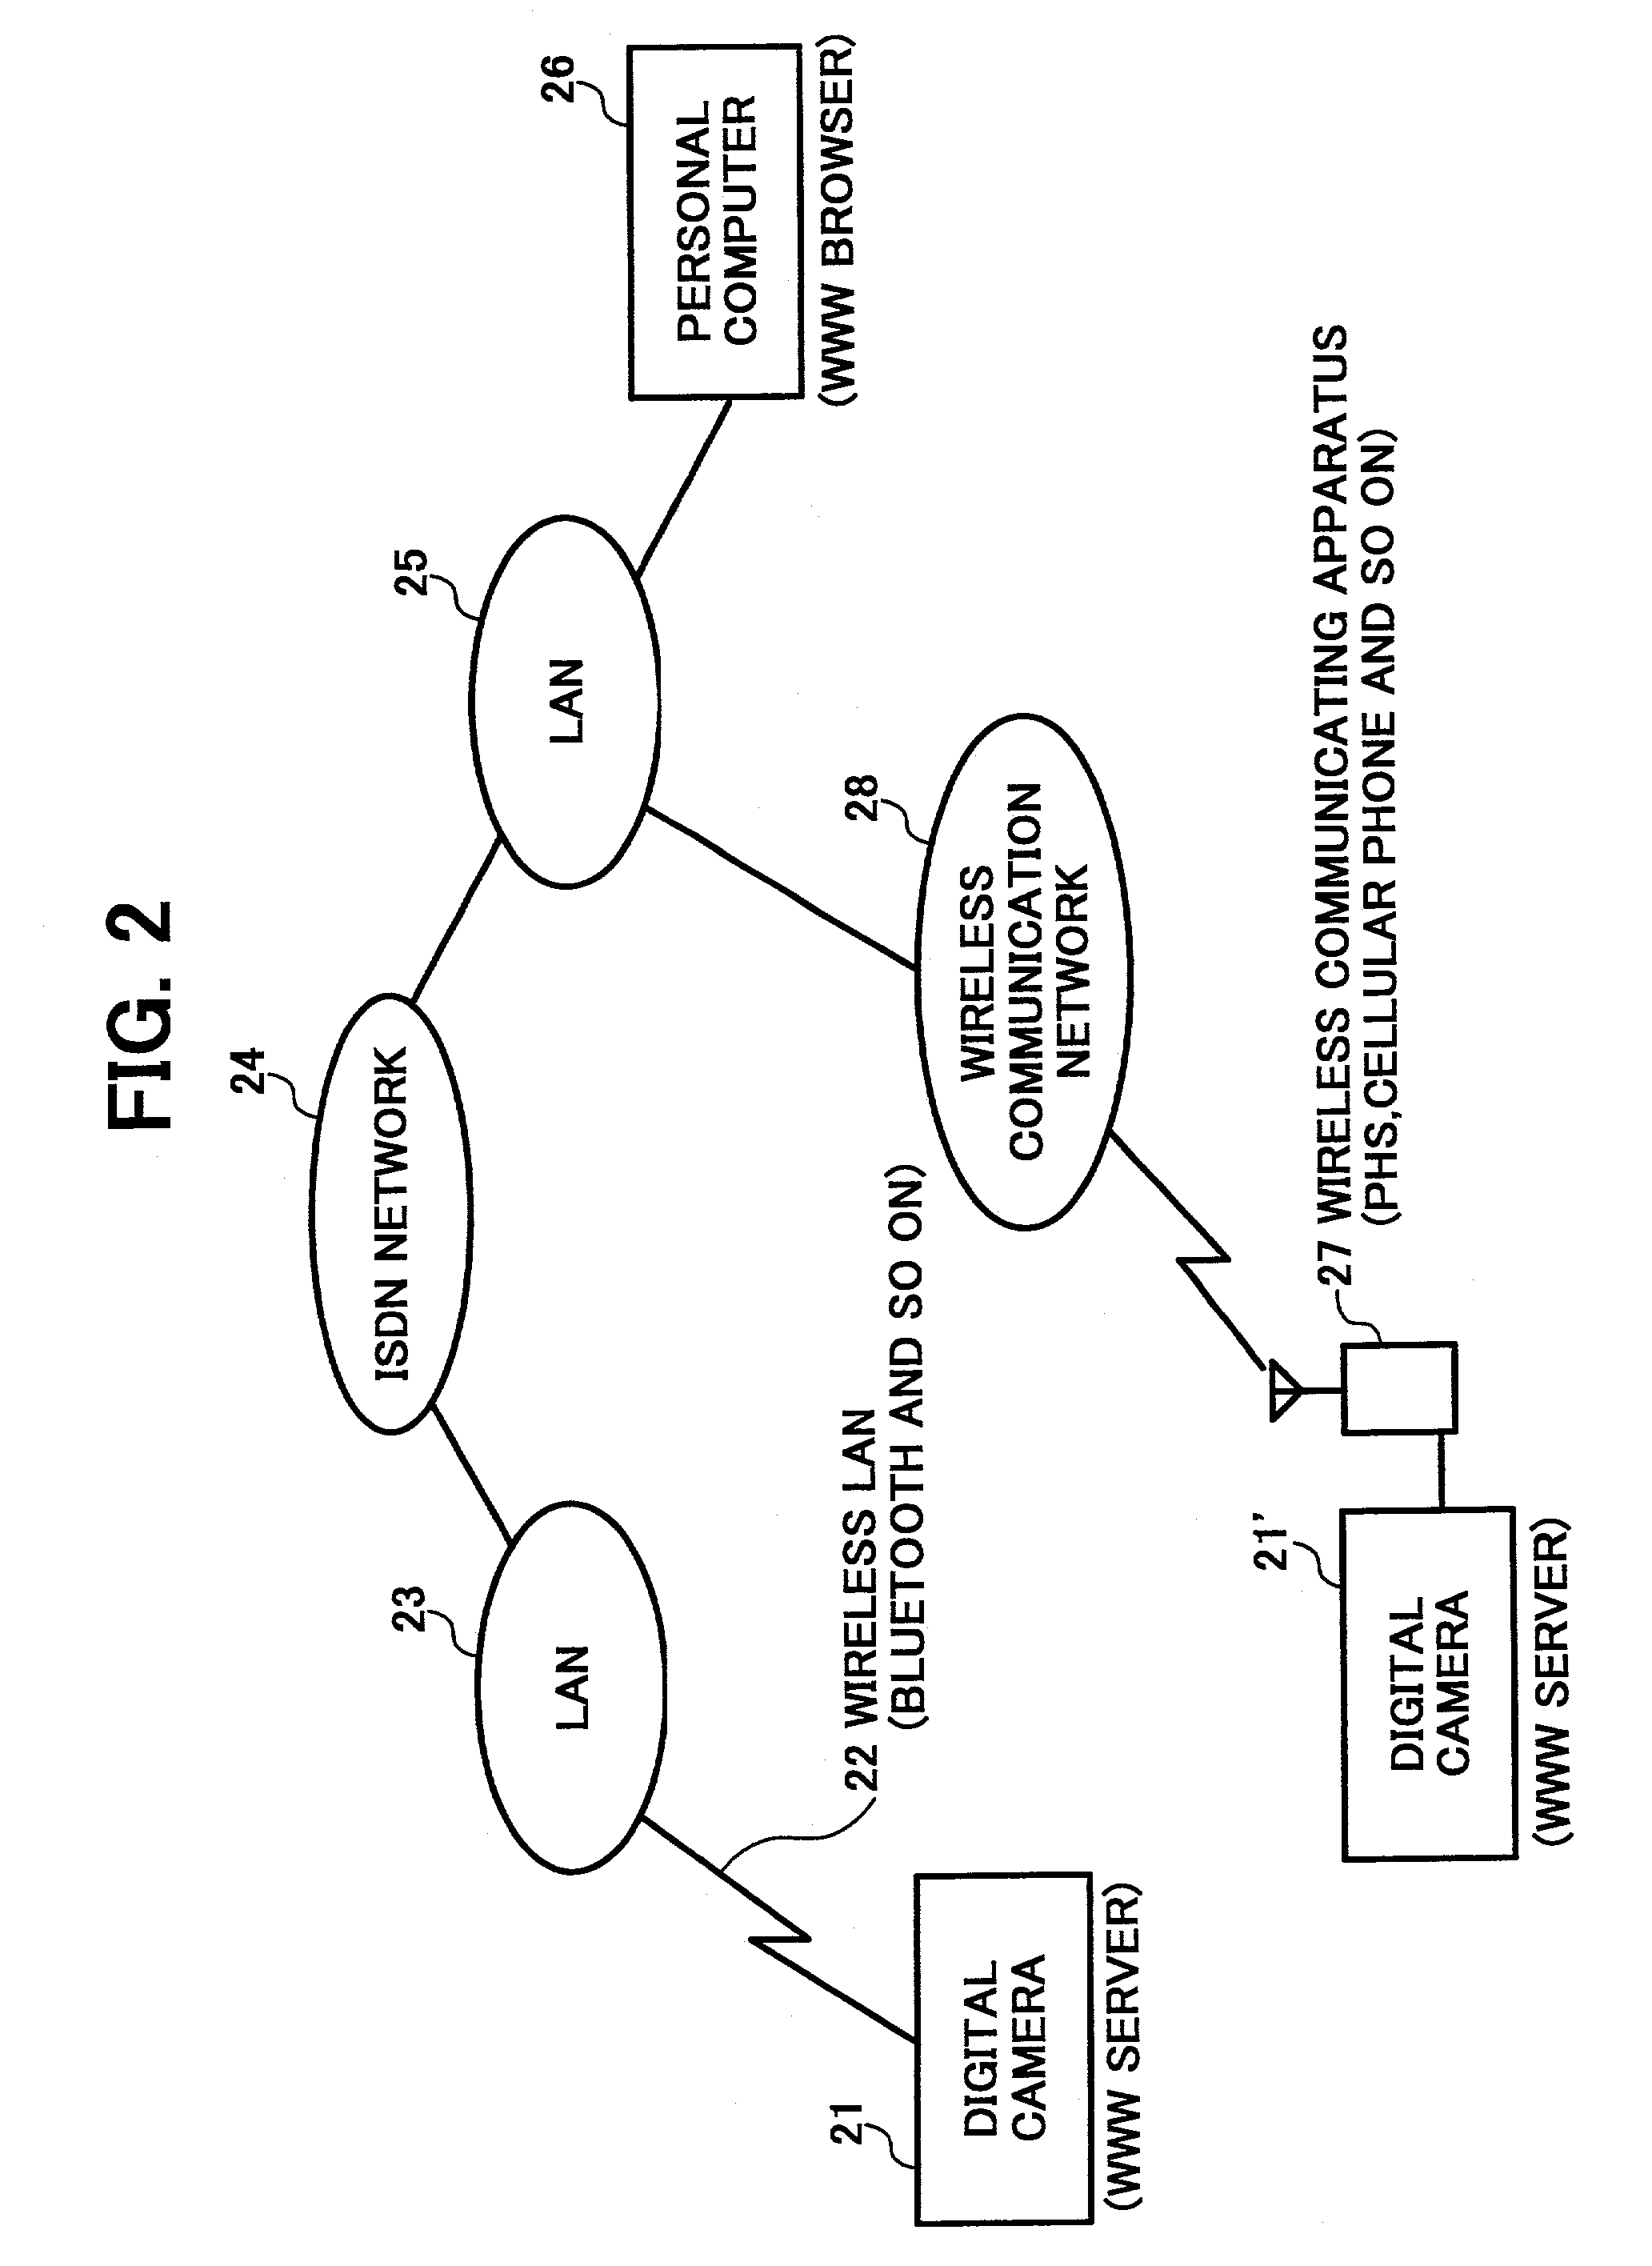 System and method for controlling a digital camera provided with a WWW server function